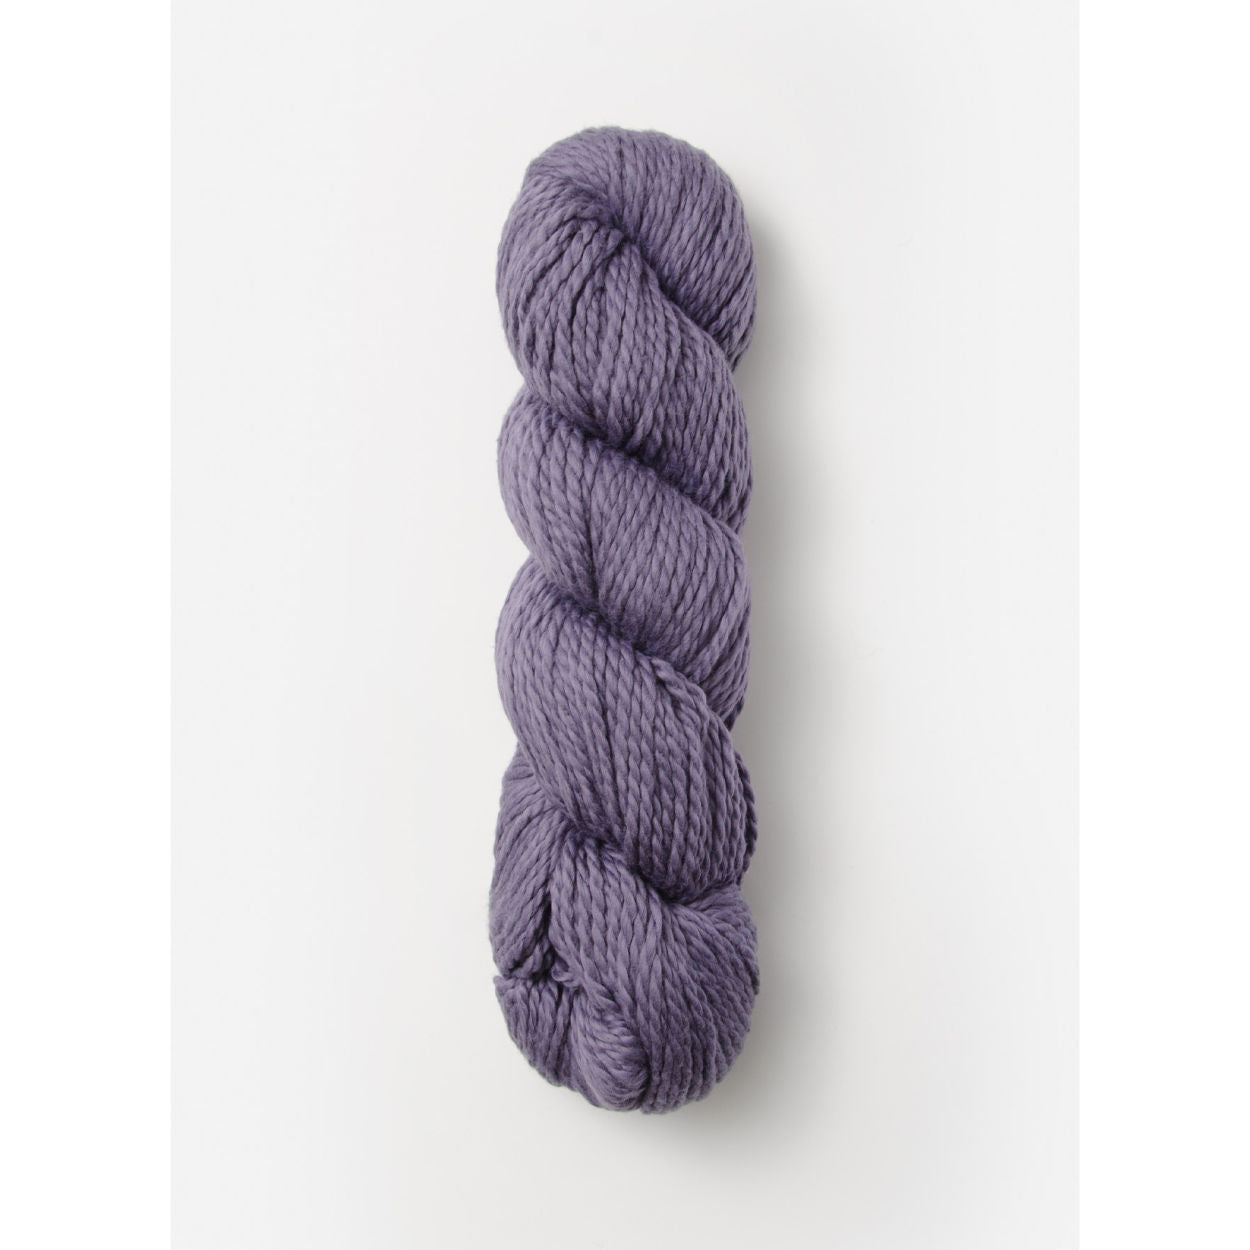 Blue Sky Fibers organic cotton worsted yarn in thistle